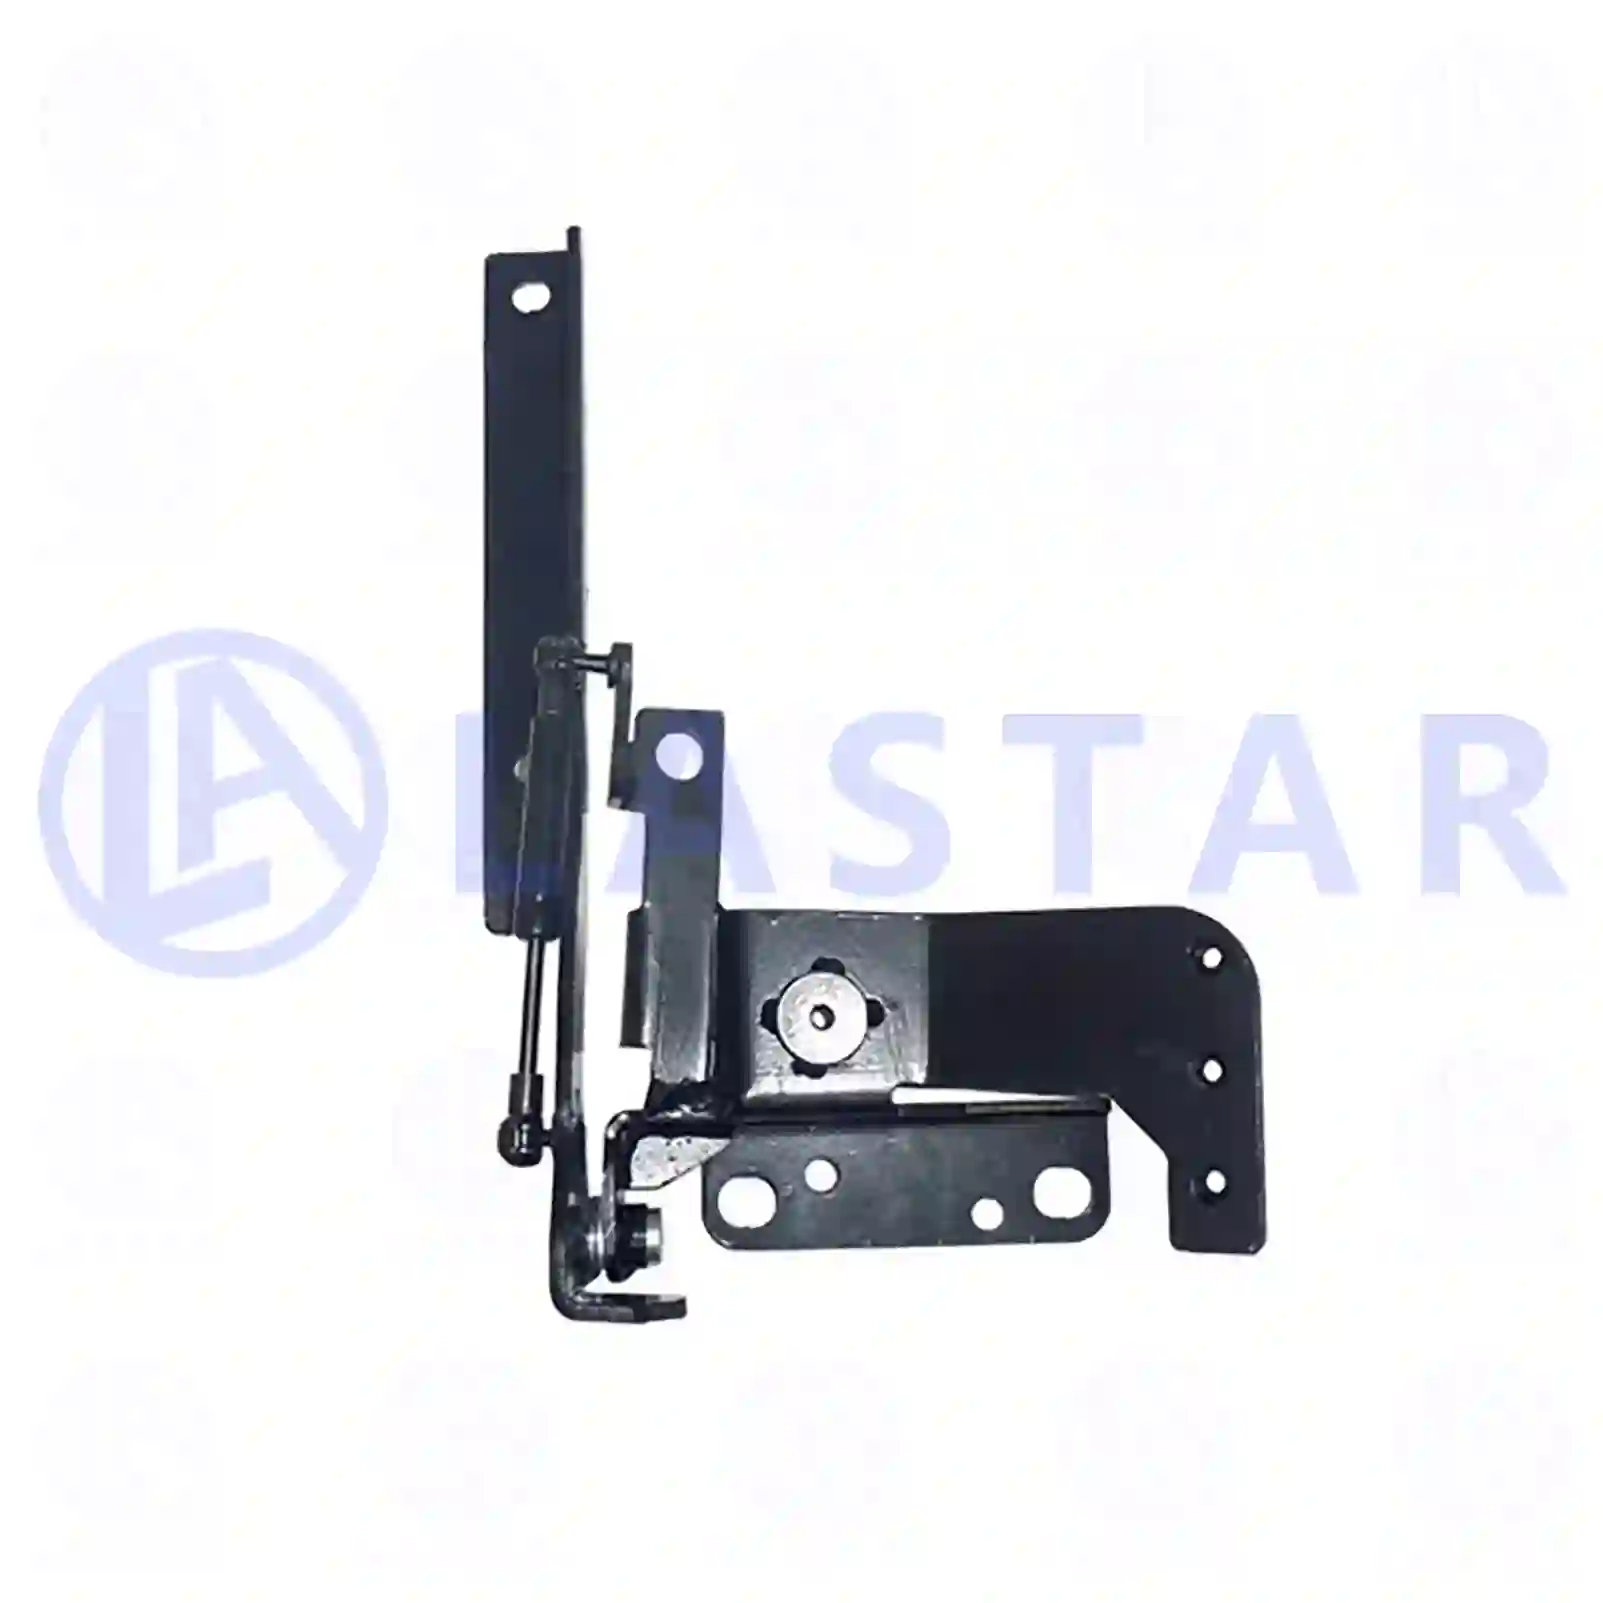 Bracket, front grill, lower, left, 77721661, 1451585, 1727263 ||  77721661 Lastar Spare Part | Truck Spare Parts, Auotomotive Spare Parts Bracket, front grill, lower, left, 77721661, 1451585, 1727263 ||  77721661 Lastar Spare Part | Truck Spare Parts, Auotomotive Spare Parts